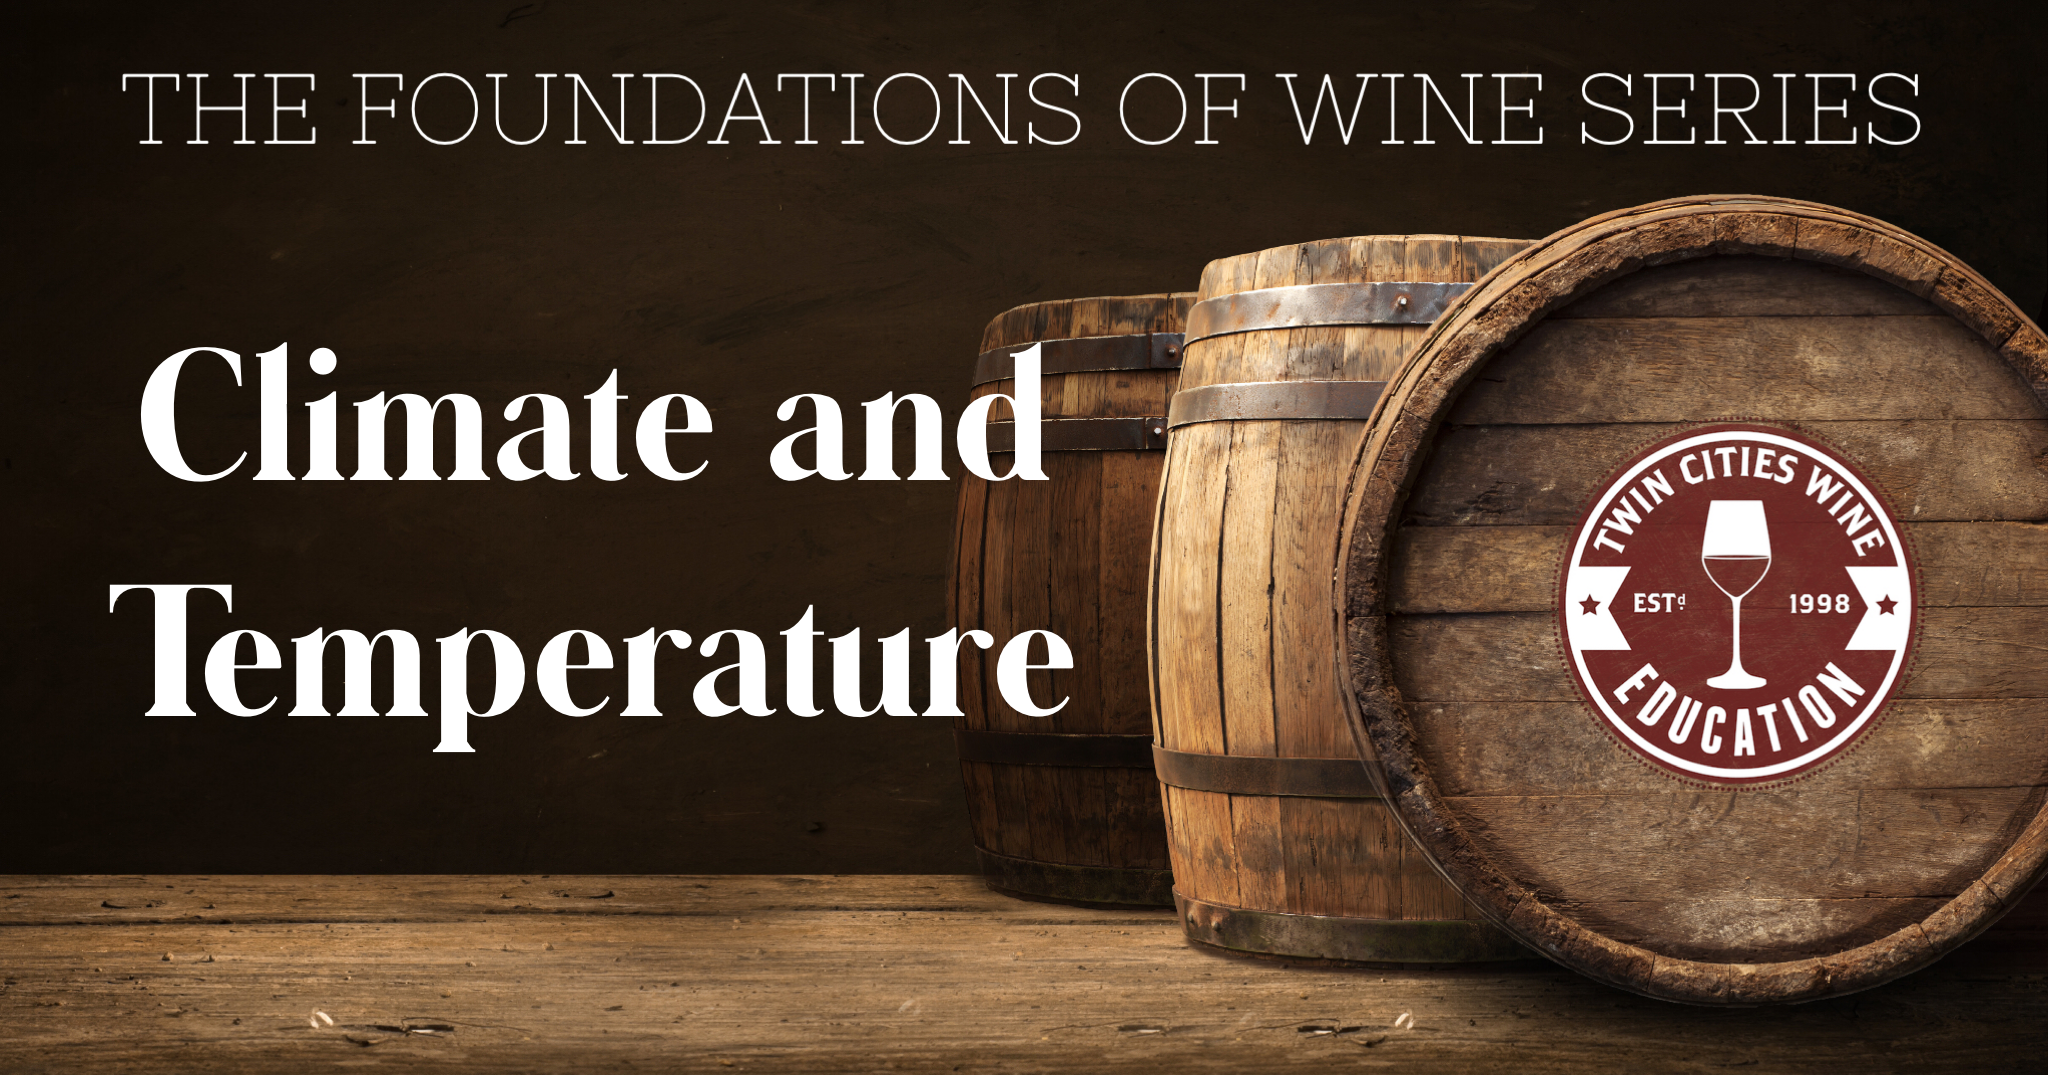 TEMPERATURE AND CLIMATE: The Foundations of Wine series